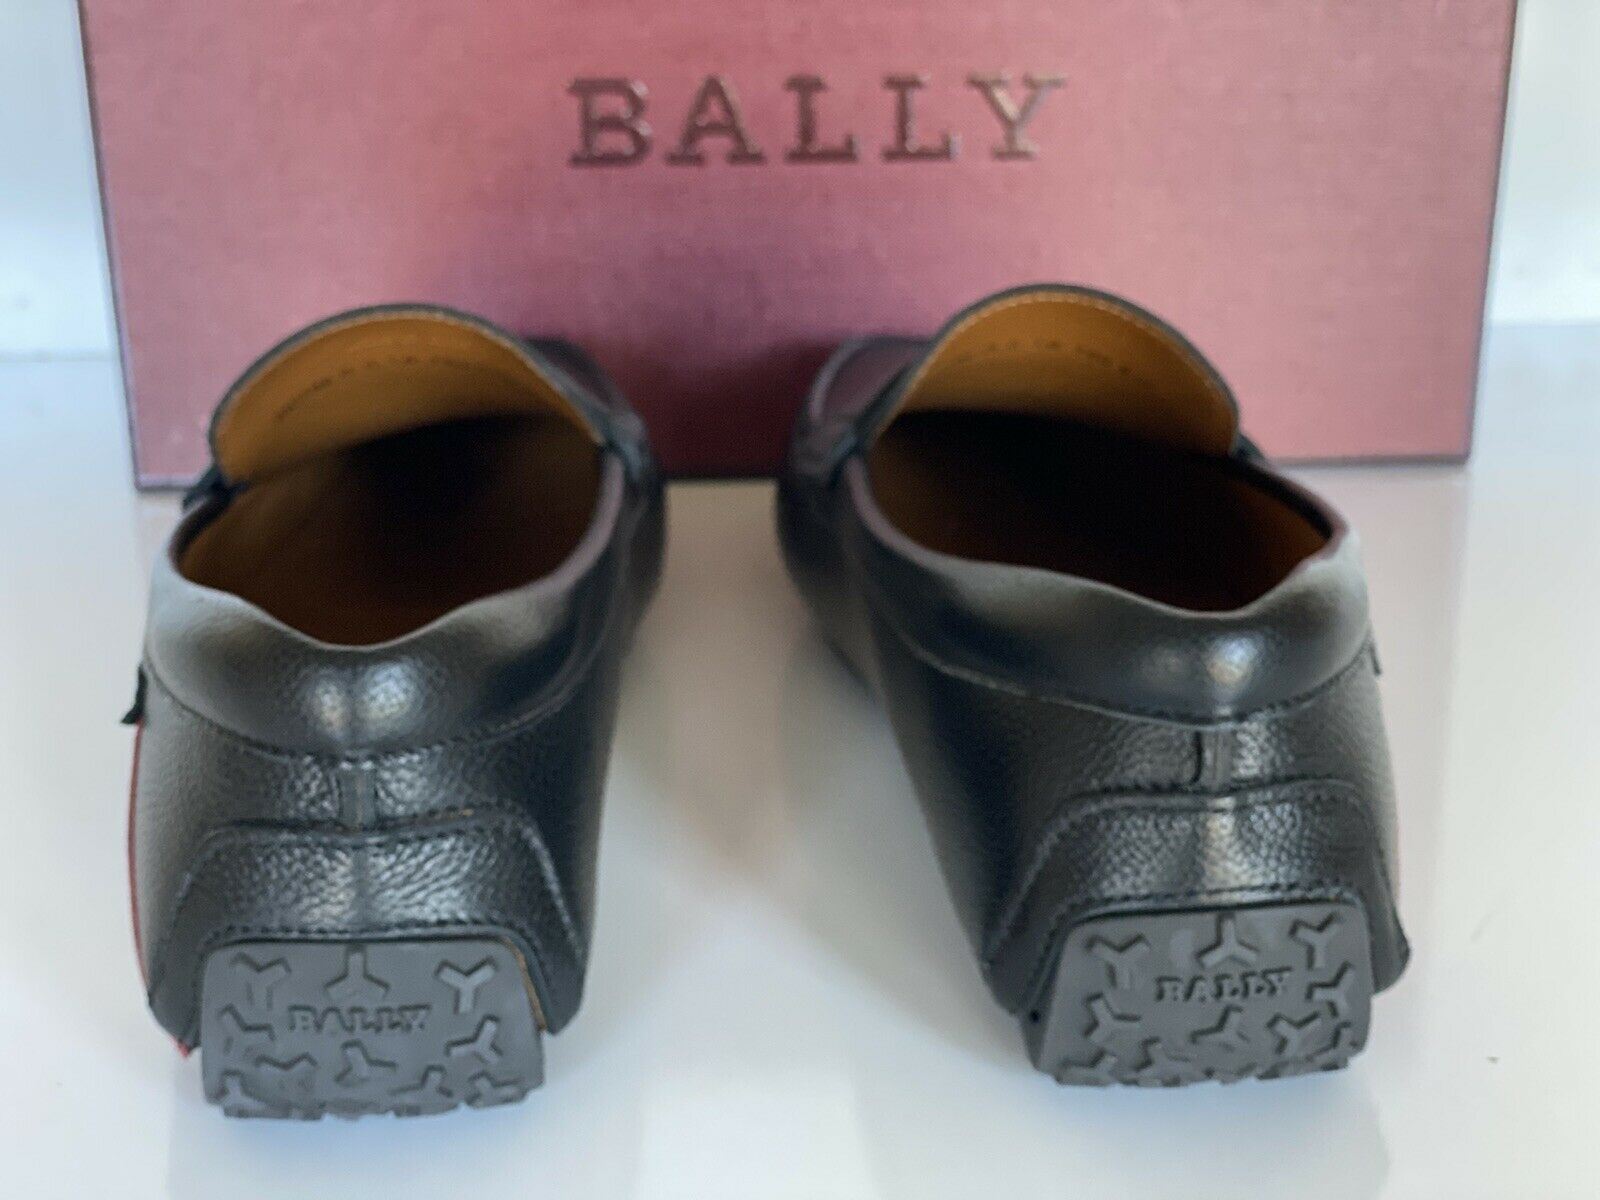 NIB Bally Mens Bovine Grained Leather Driver Loafers Shoes Black 8.5 US 6233869